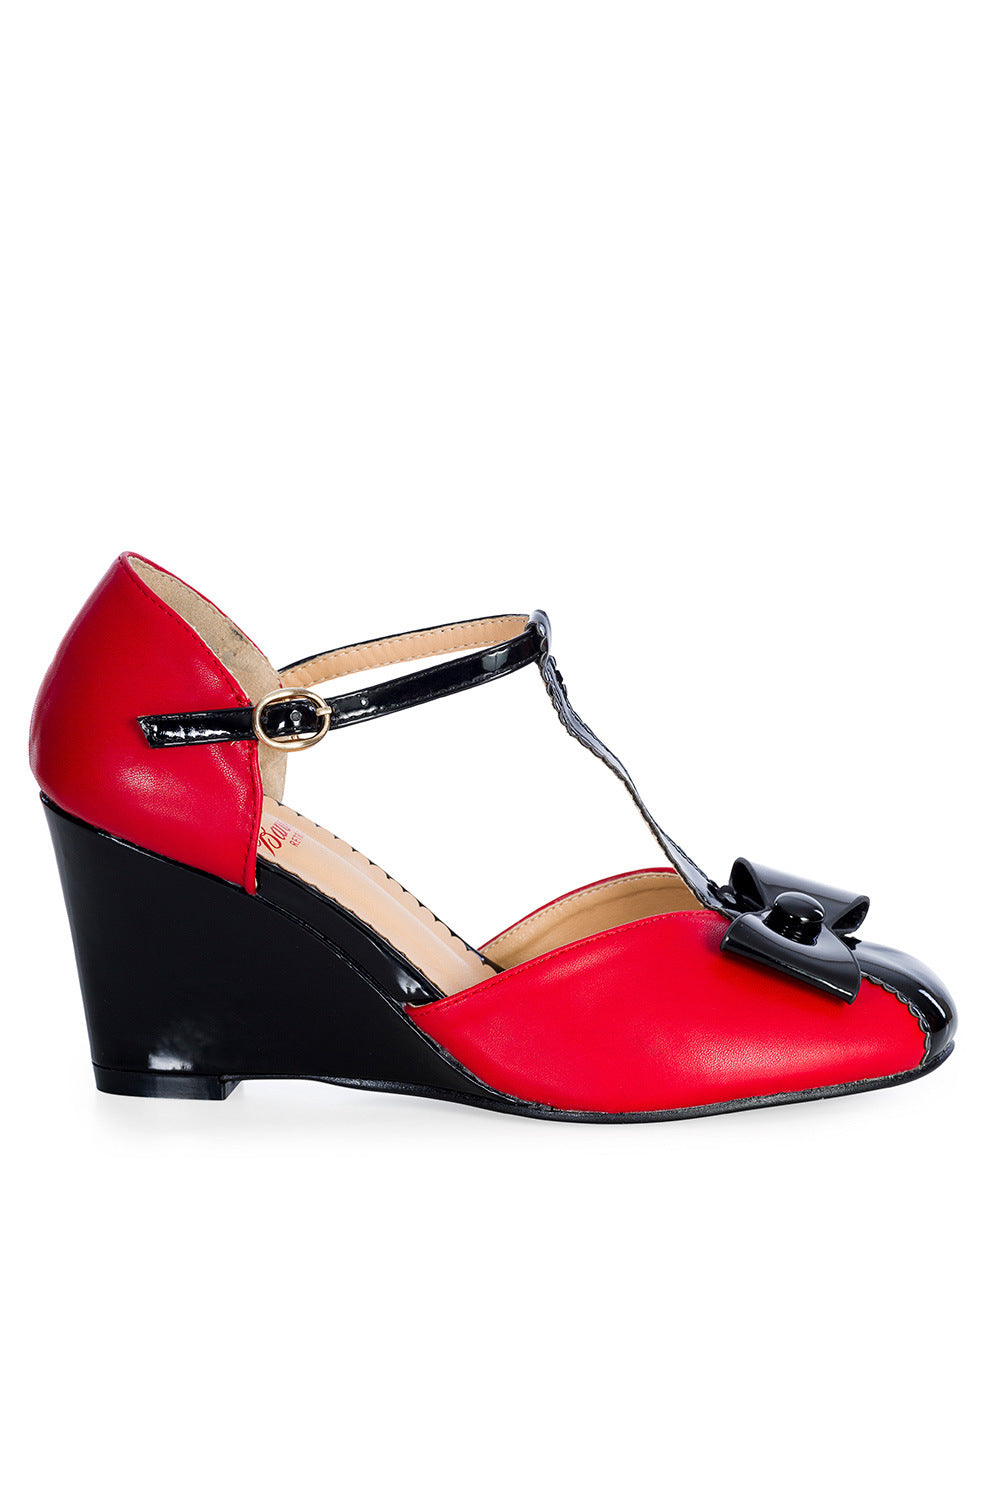 Bow Vixen Red/Black Wedges by Banned